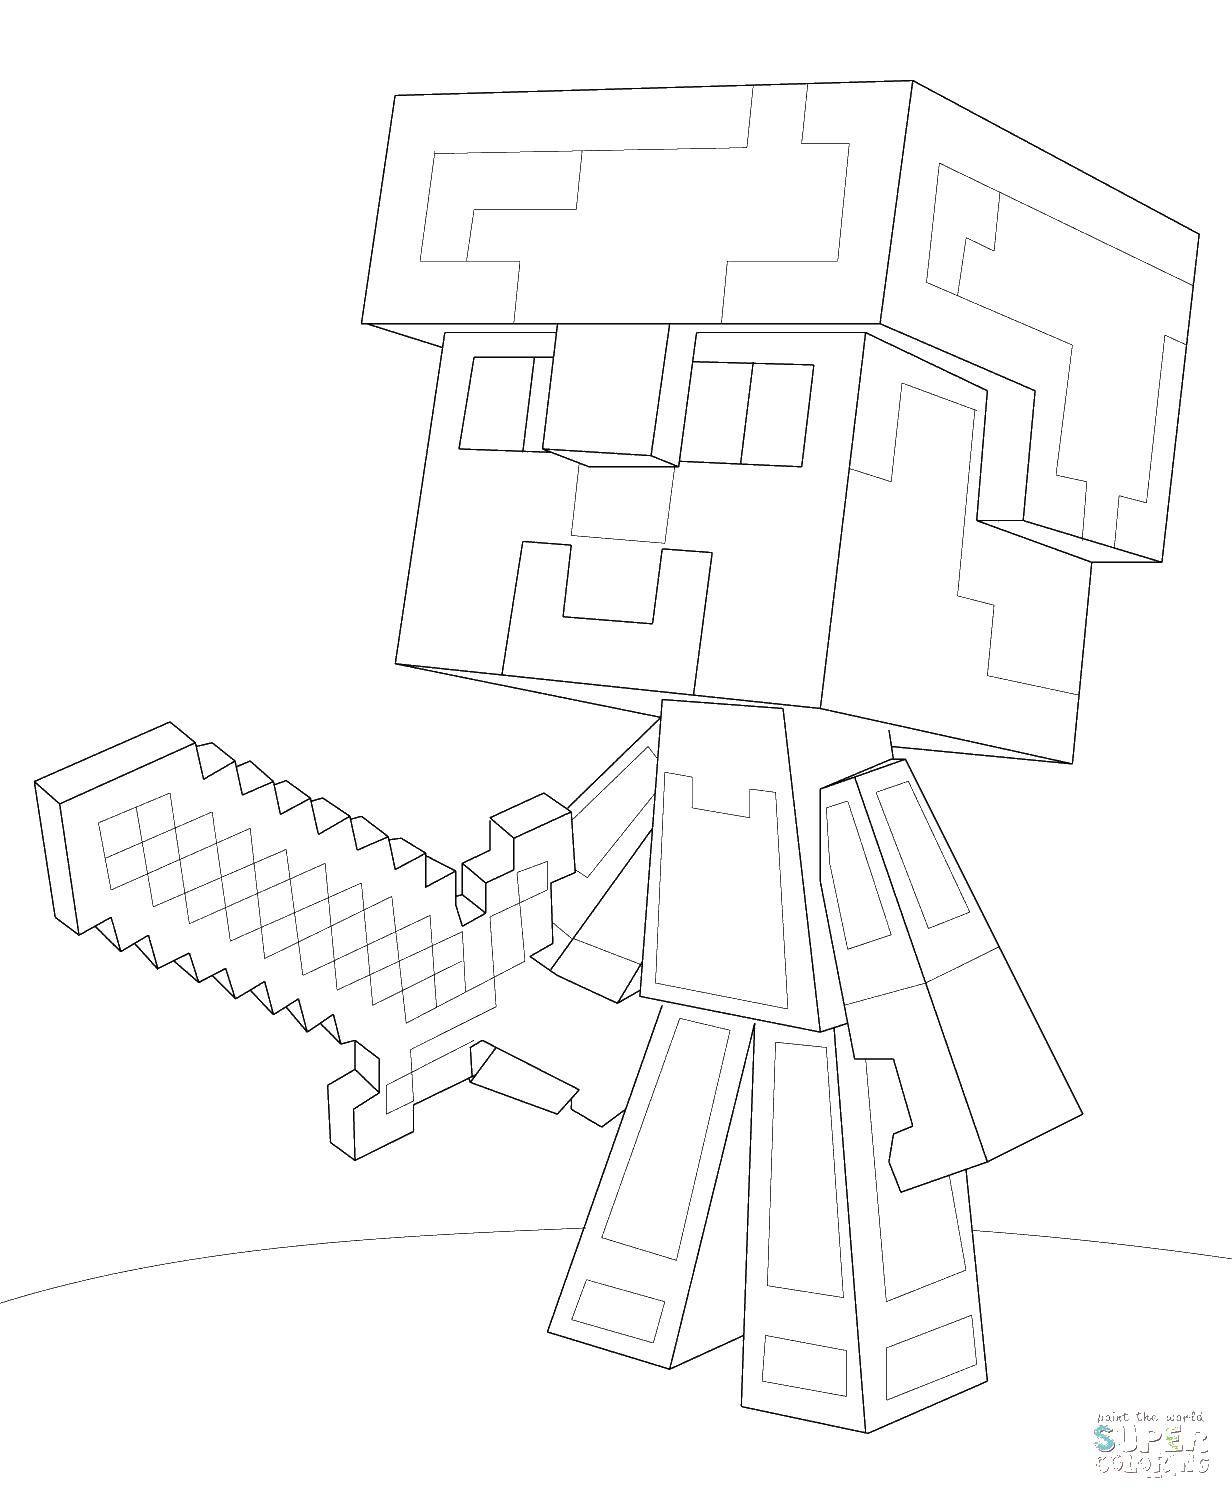 Coloring Minecraft man with a sword. Category minecraft. Tags:  minecraft, people.